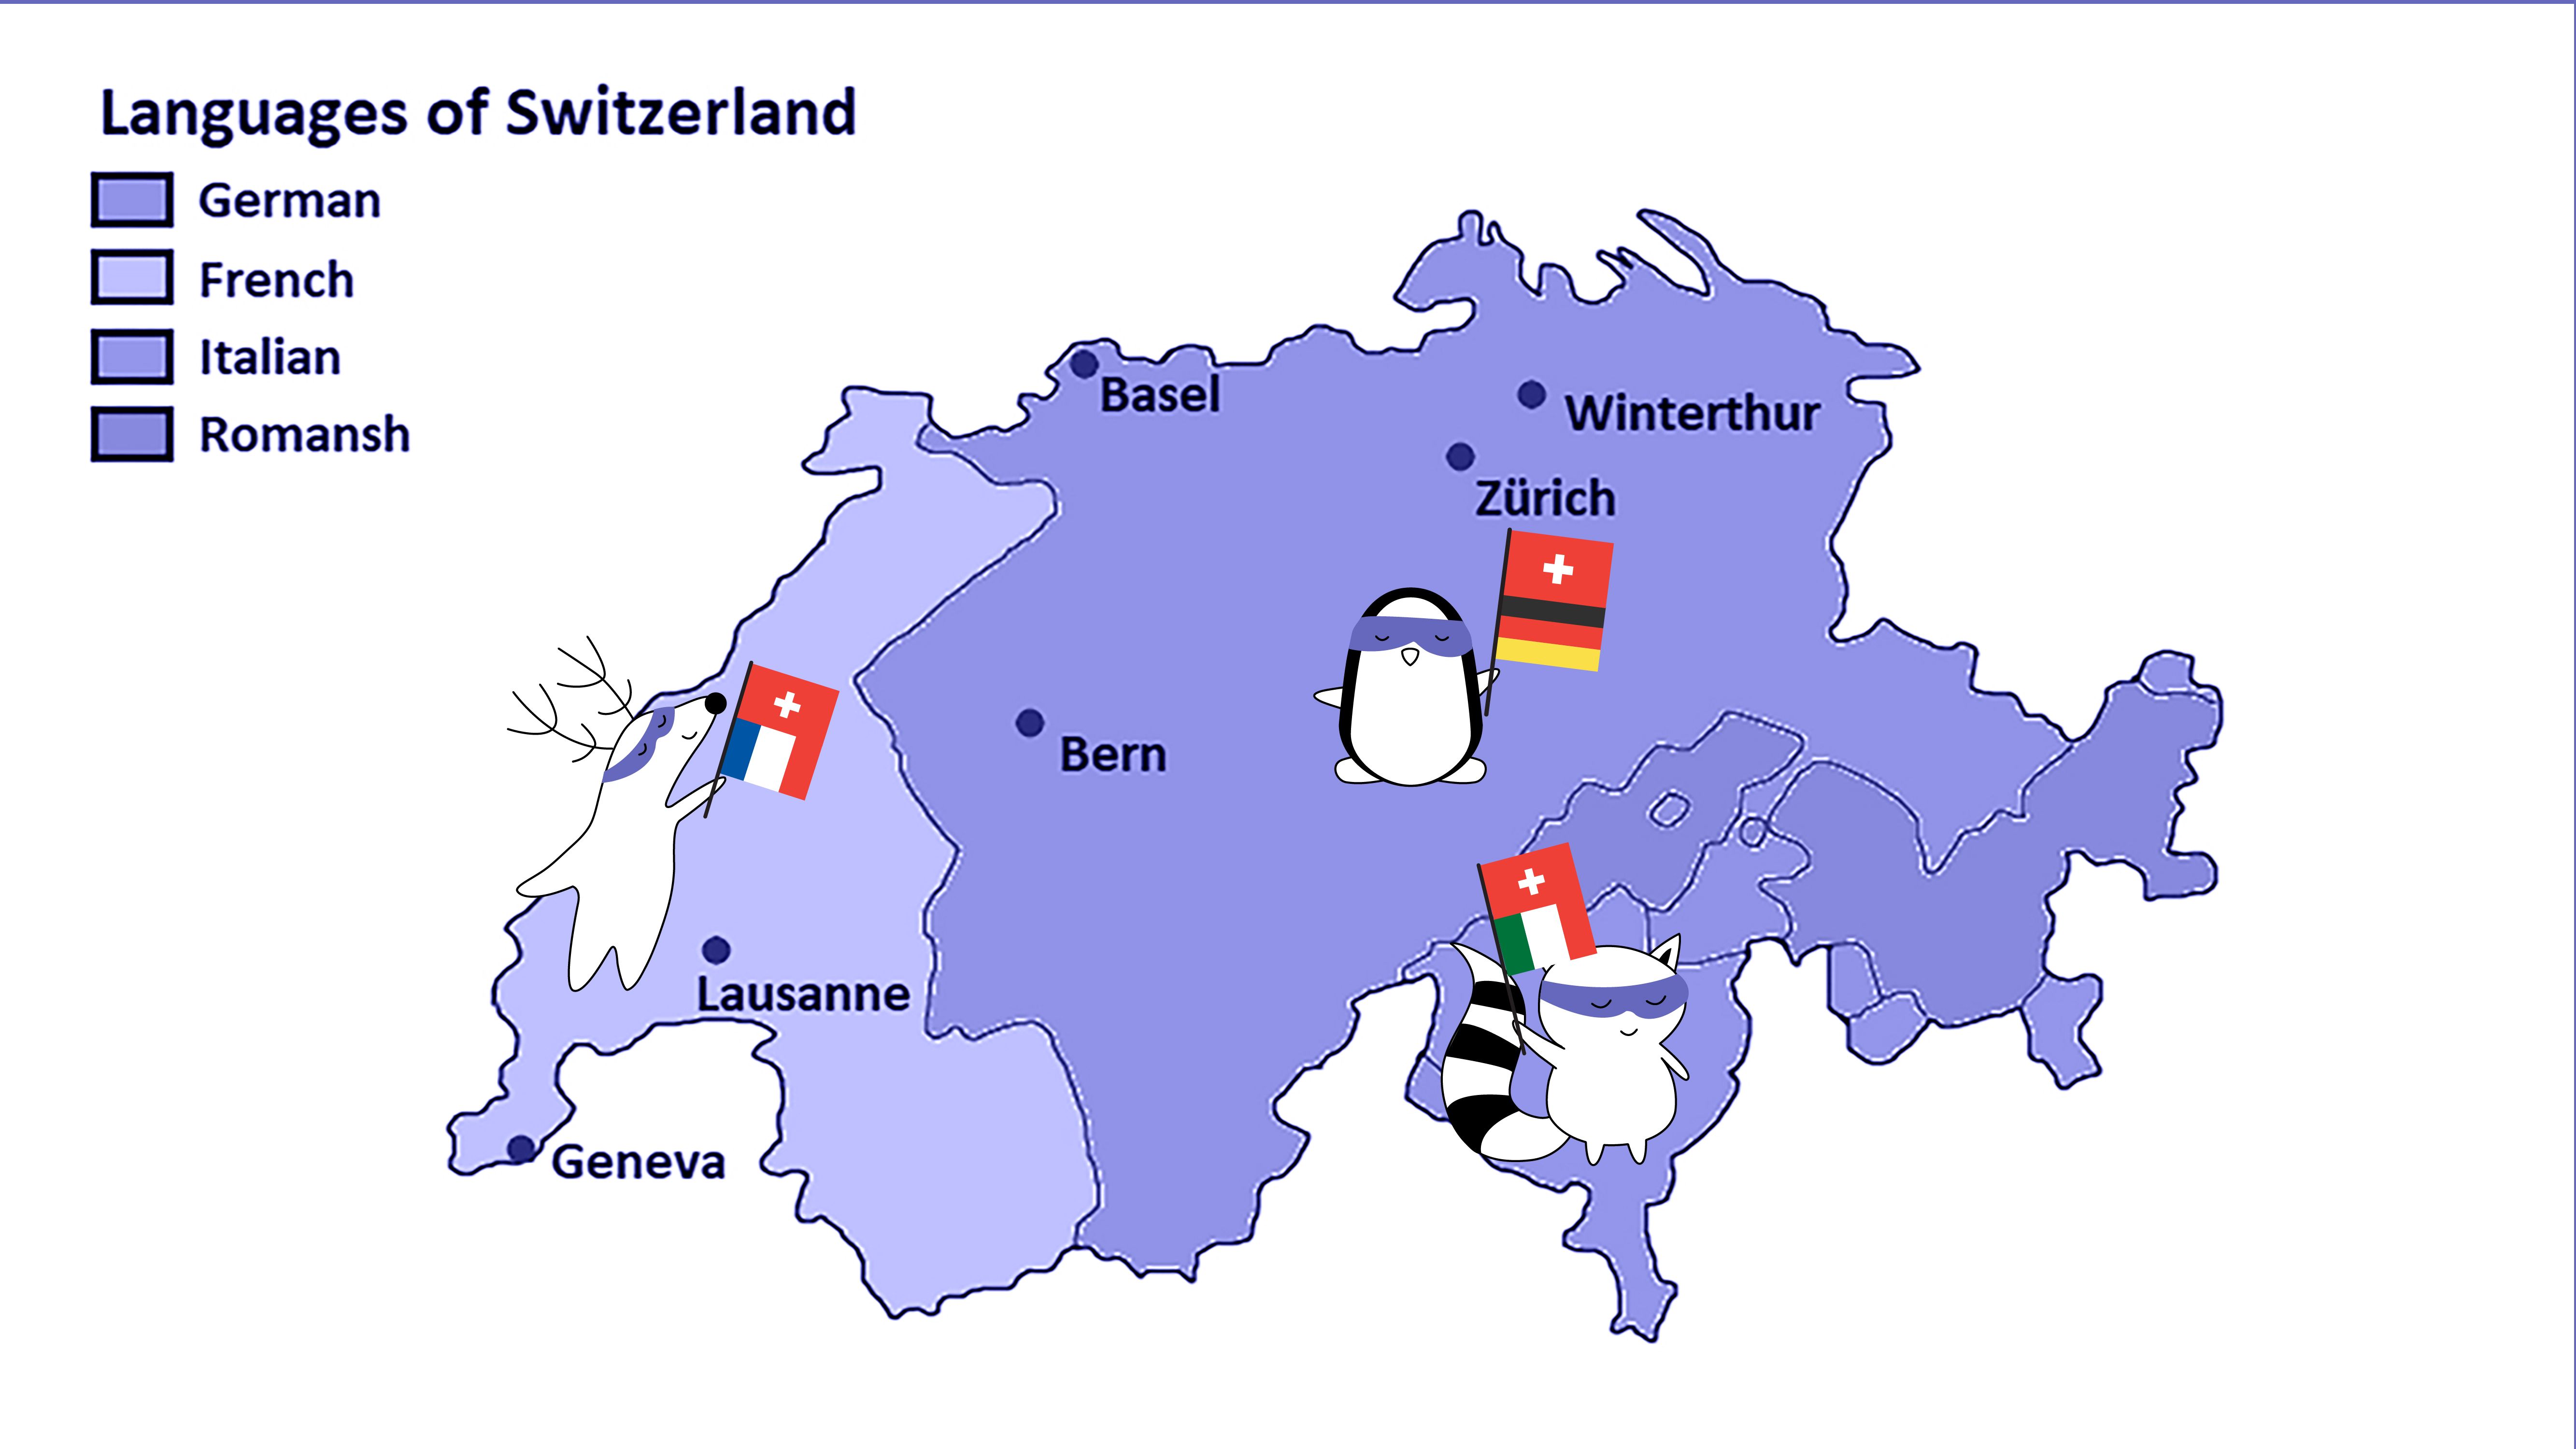 On the same map, there is also Benji now, next to the Ticino region, holding a flag that is a mix of Italian and Swiss flags.